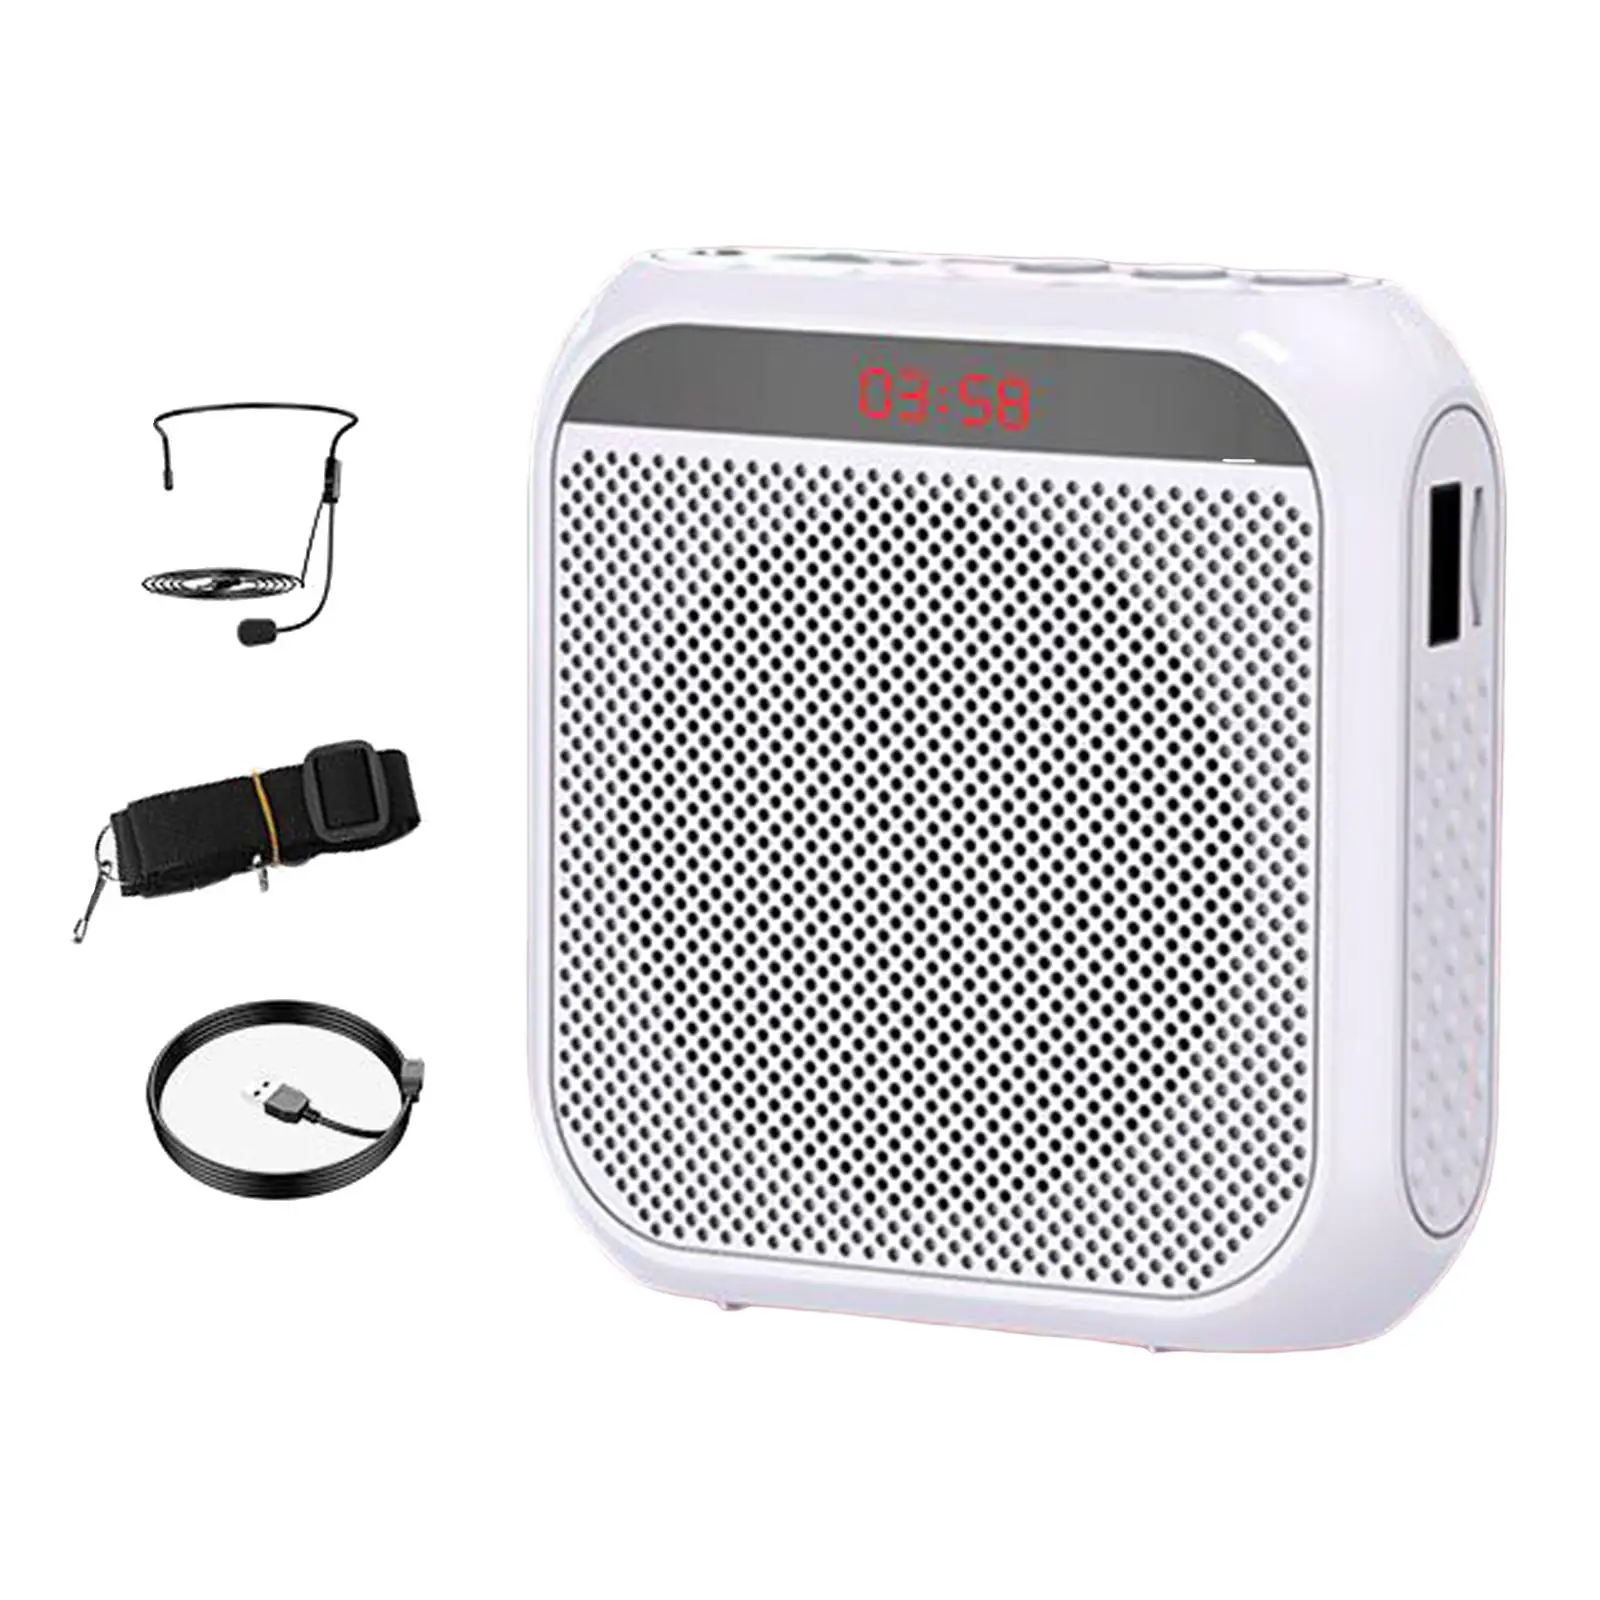 Mini Voice Amplifier Vocal Boost Support TF Card U Disk Loundspeaker Megaphone for Classroom Meeting Tour Guides Elderly Coaches